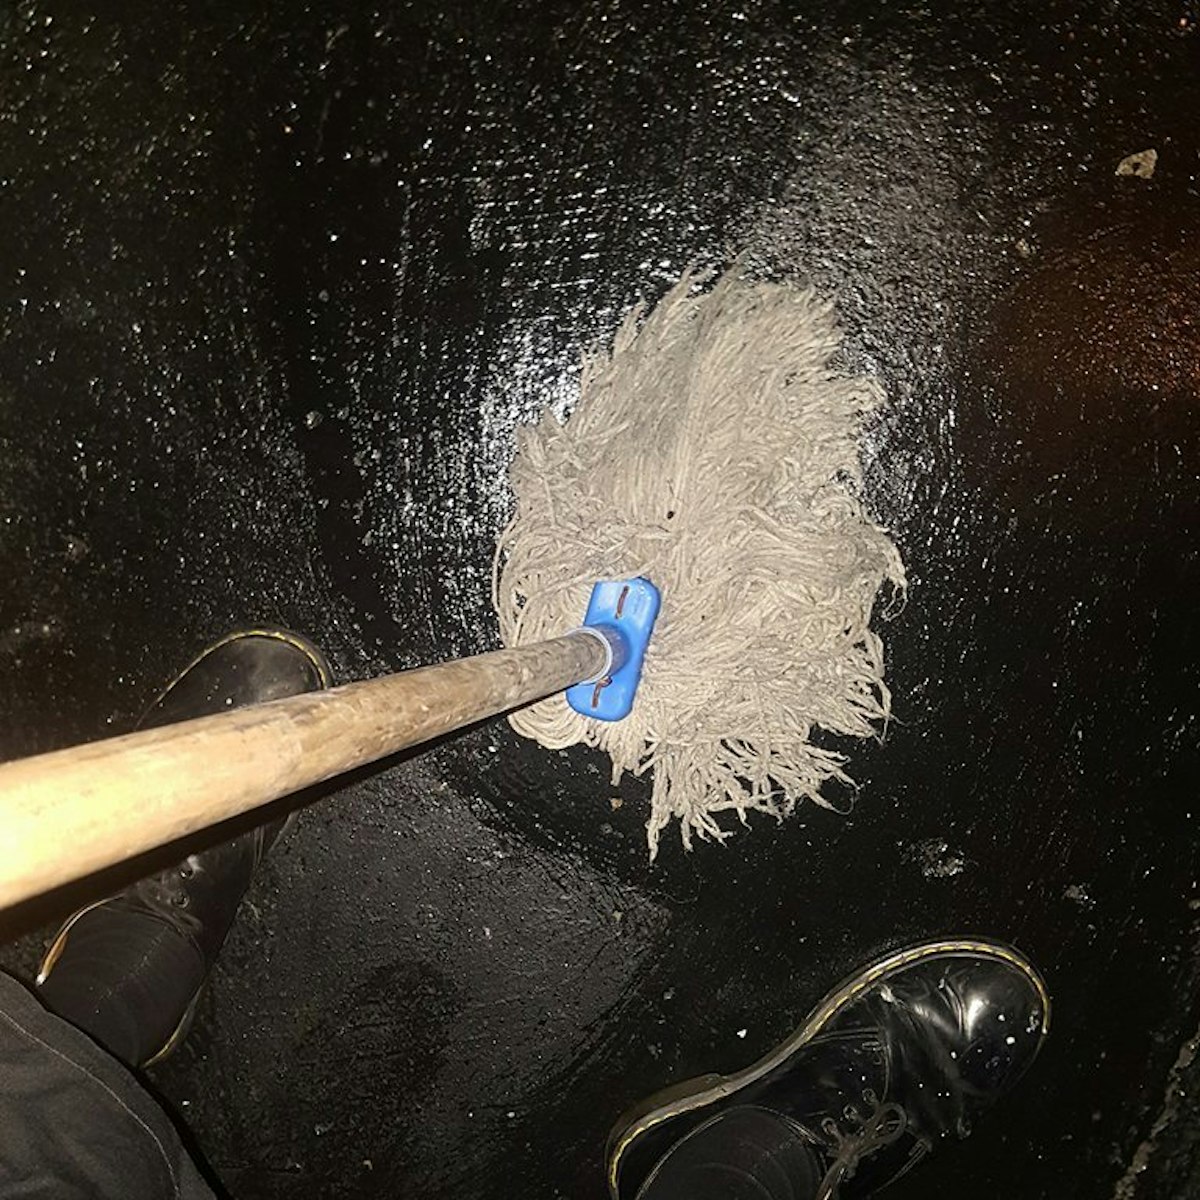 A hairy mop is being pushed against a shiny black concrete floor in a sex on site club. The image is taken looking down at the mop and the artists feet, mid way through mopping the floor.